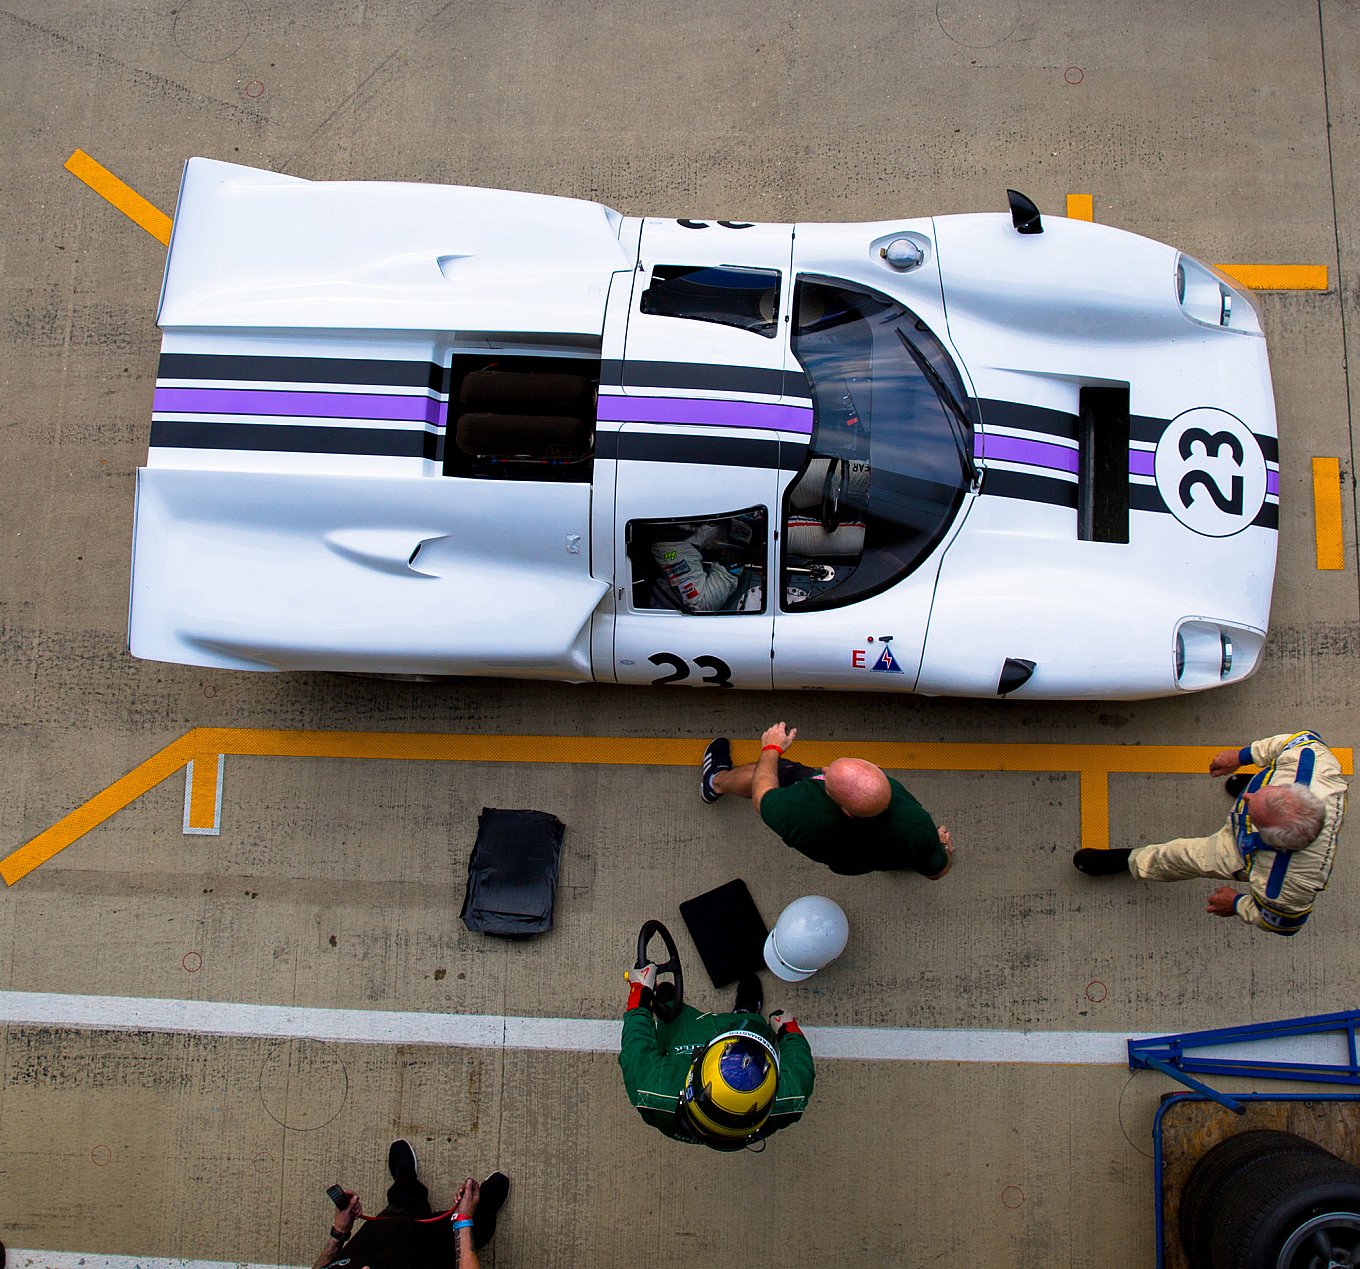 silverstone-classic-racing-cars-from-above-5